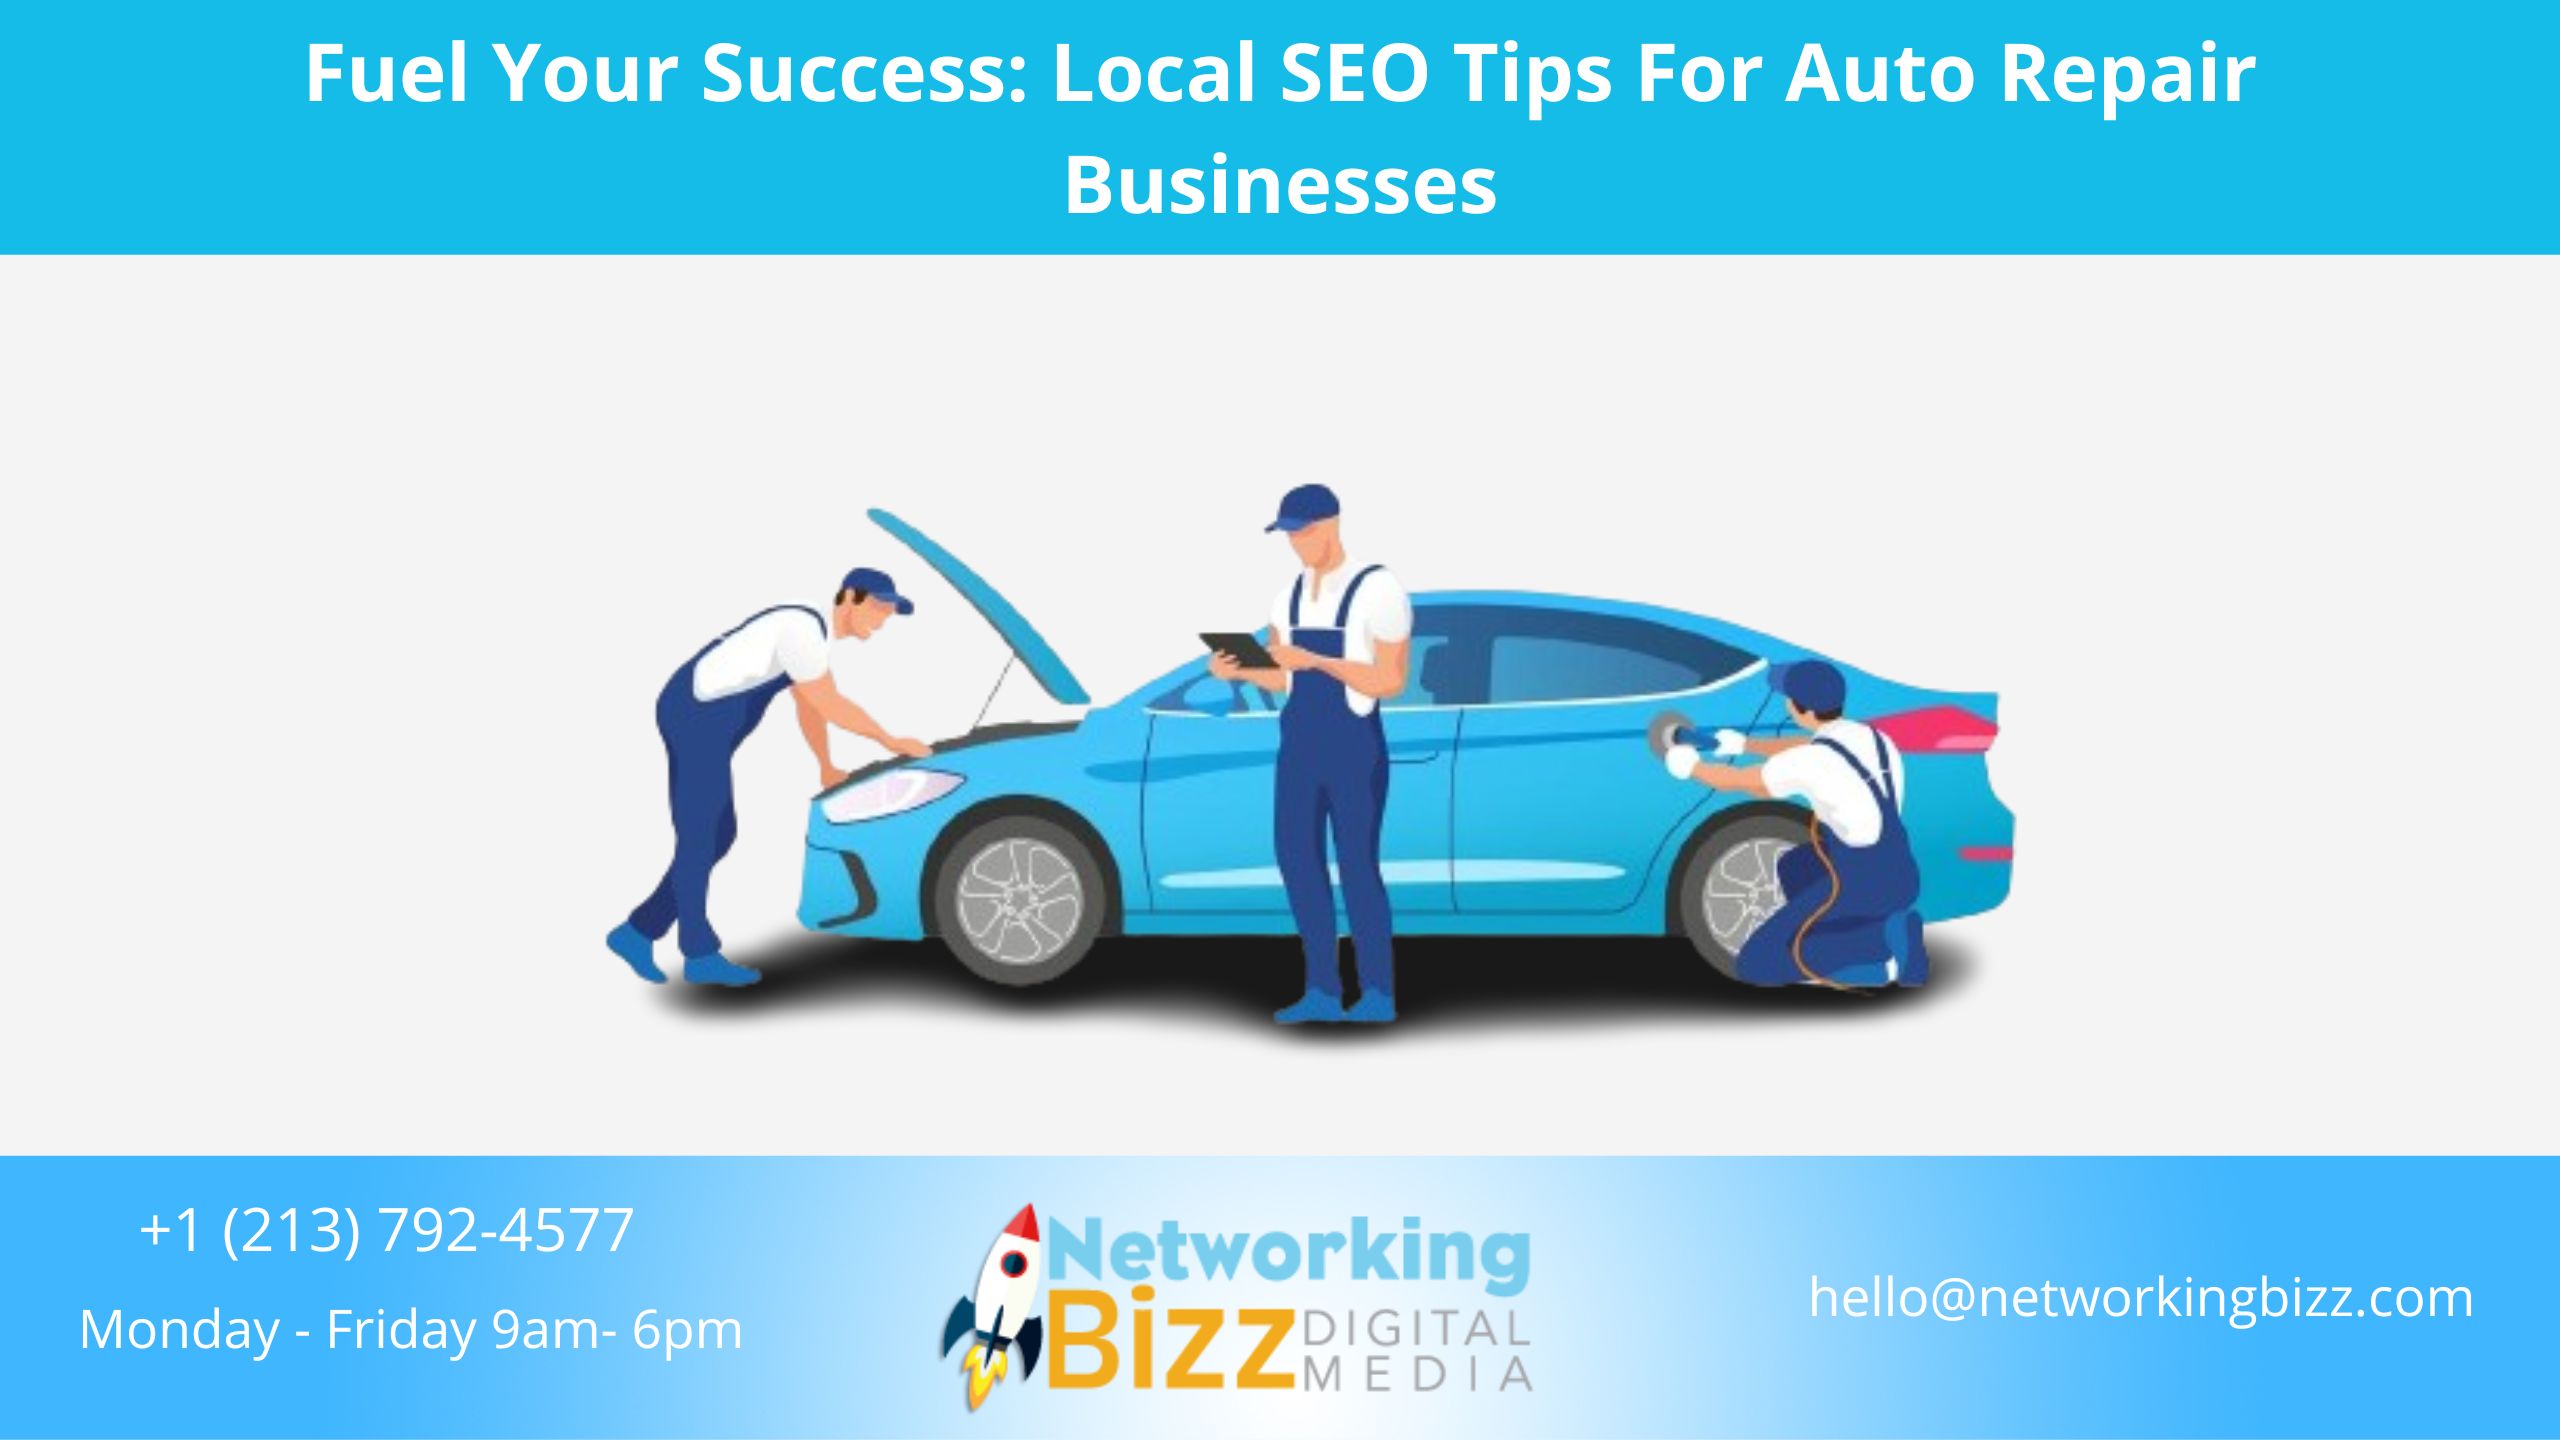 Fuel Your Success: Local SEO Tips For Auto Repair Businesses